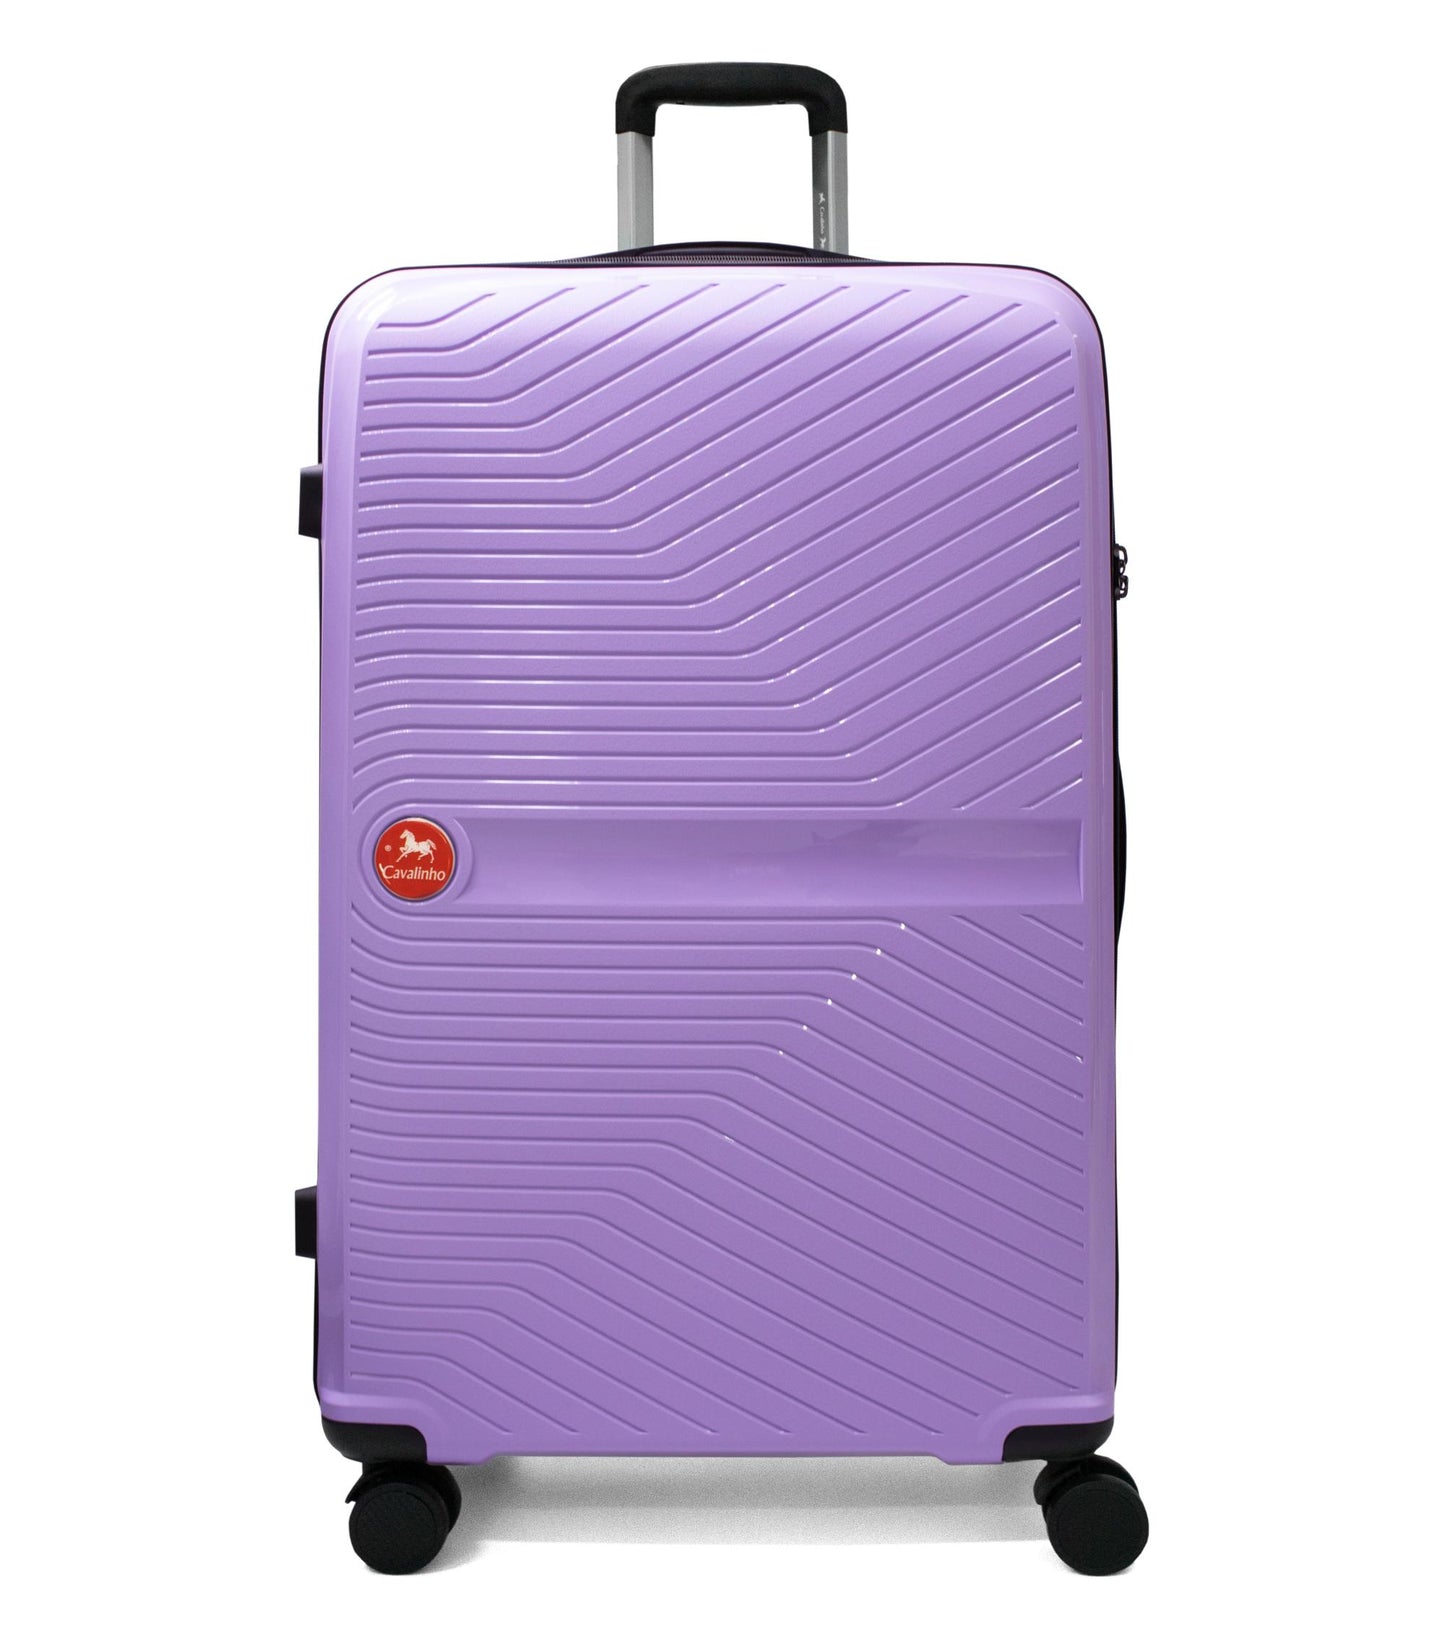 Cavalinho Colorful Check-in Hardside Luggage (28") - 28 inch Lilac - 68020004.39.28_1